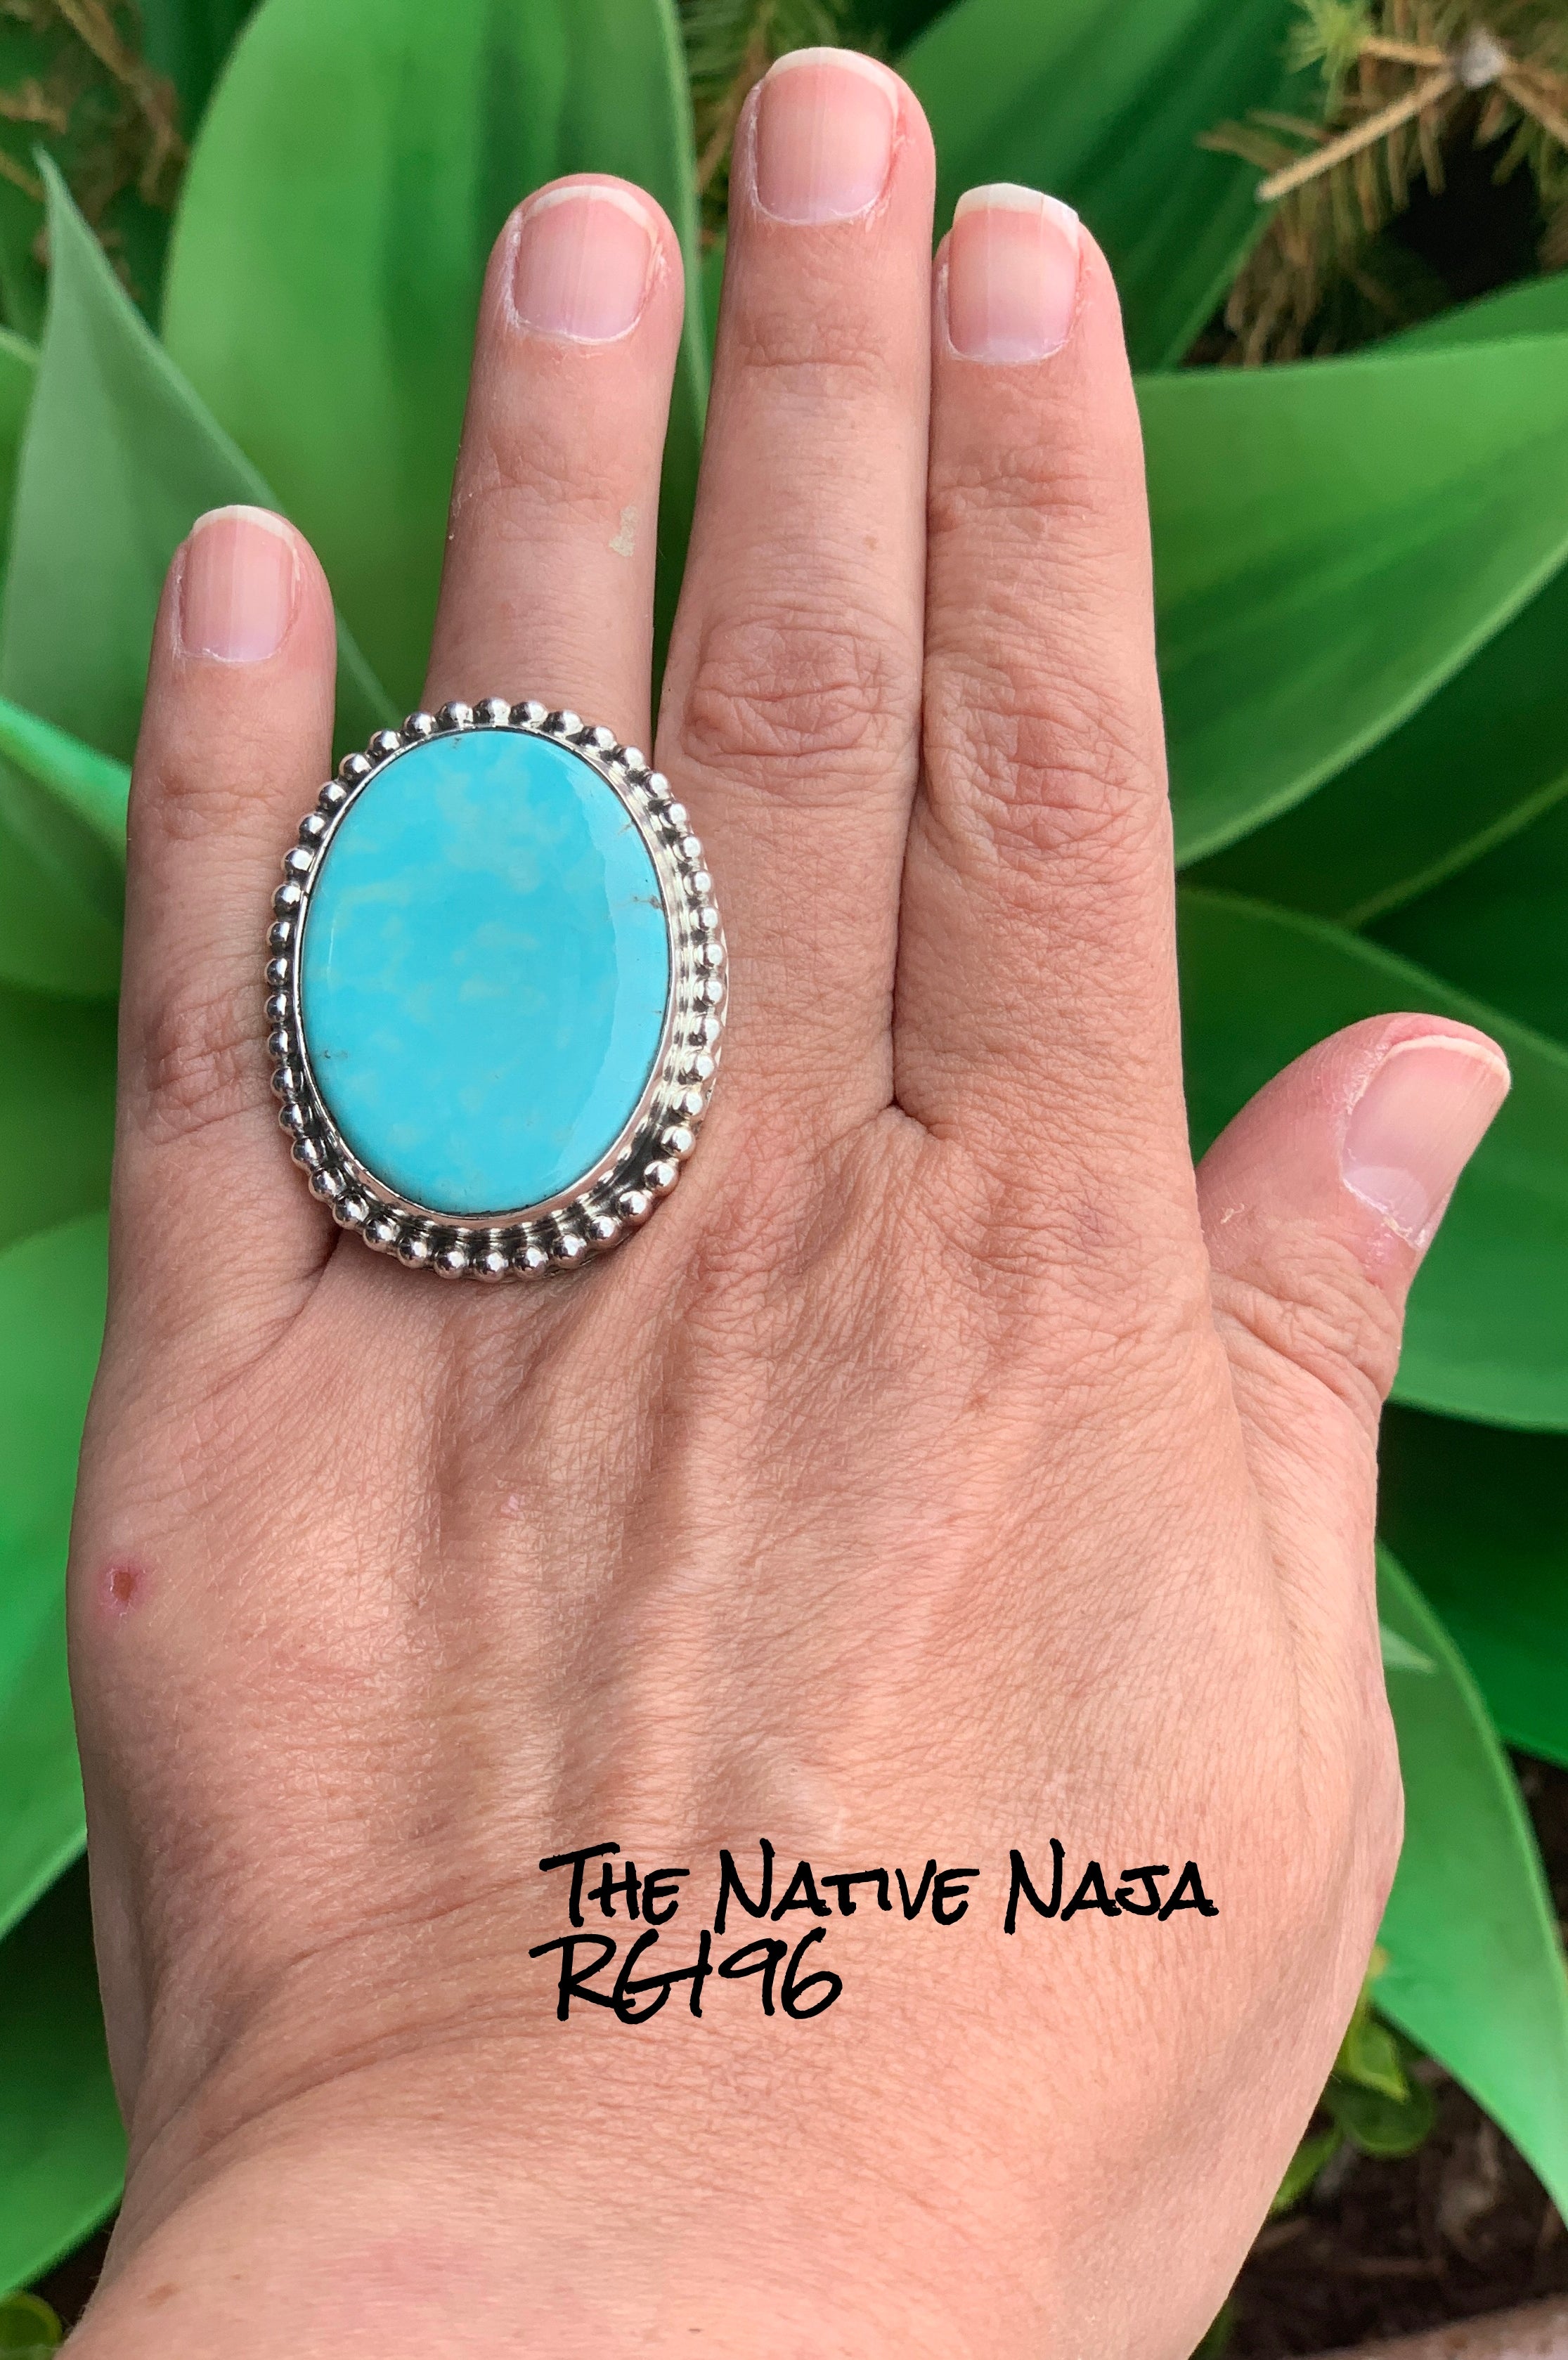 LRG JL Chimney Butte Gallery Navajo Campitos Turquoise & Sterling Silver Ring Size 7 RG196